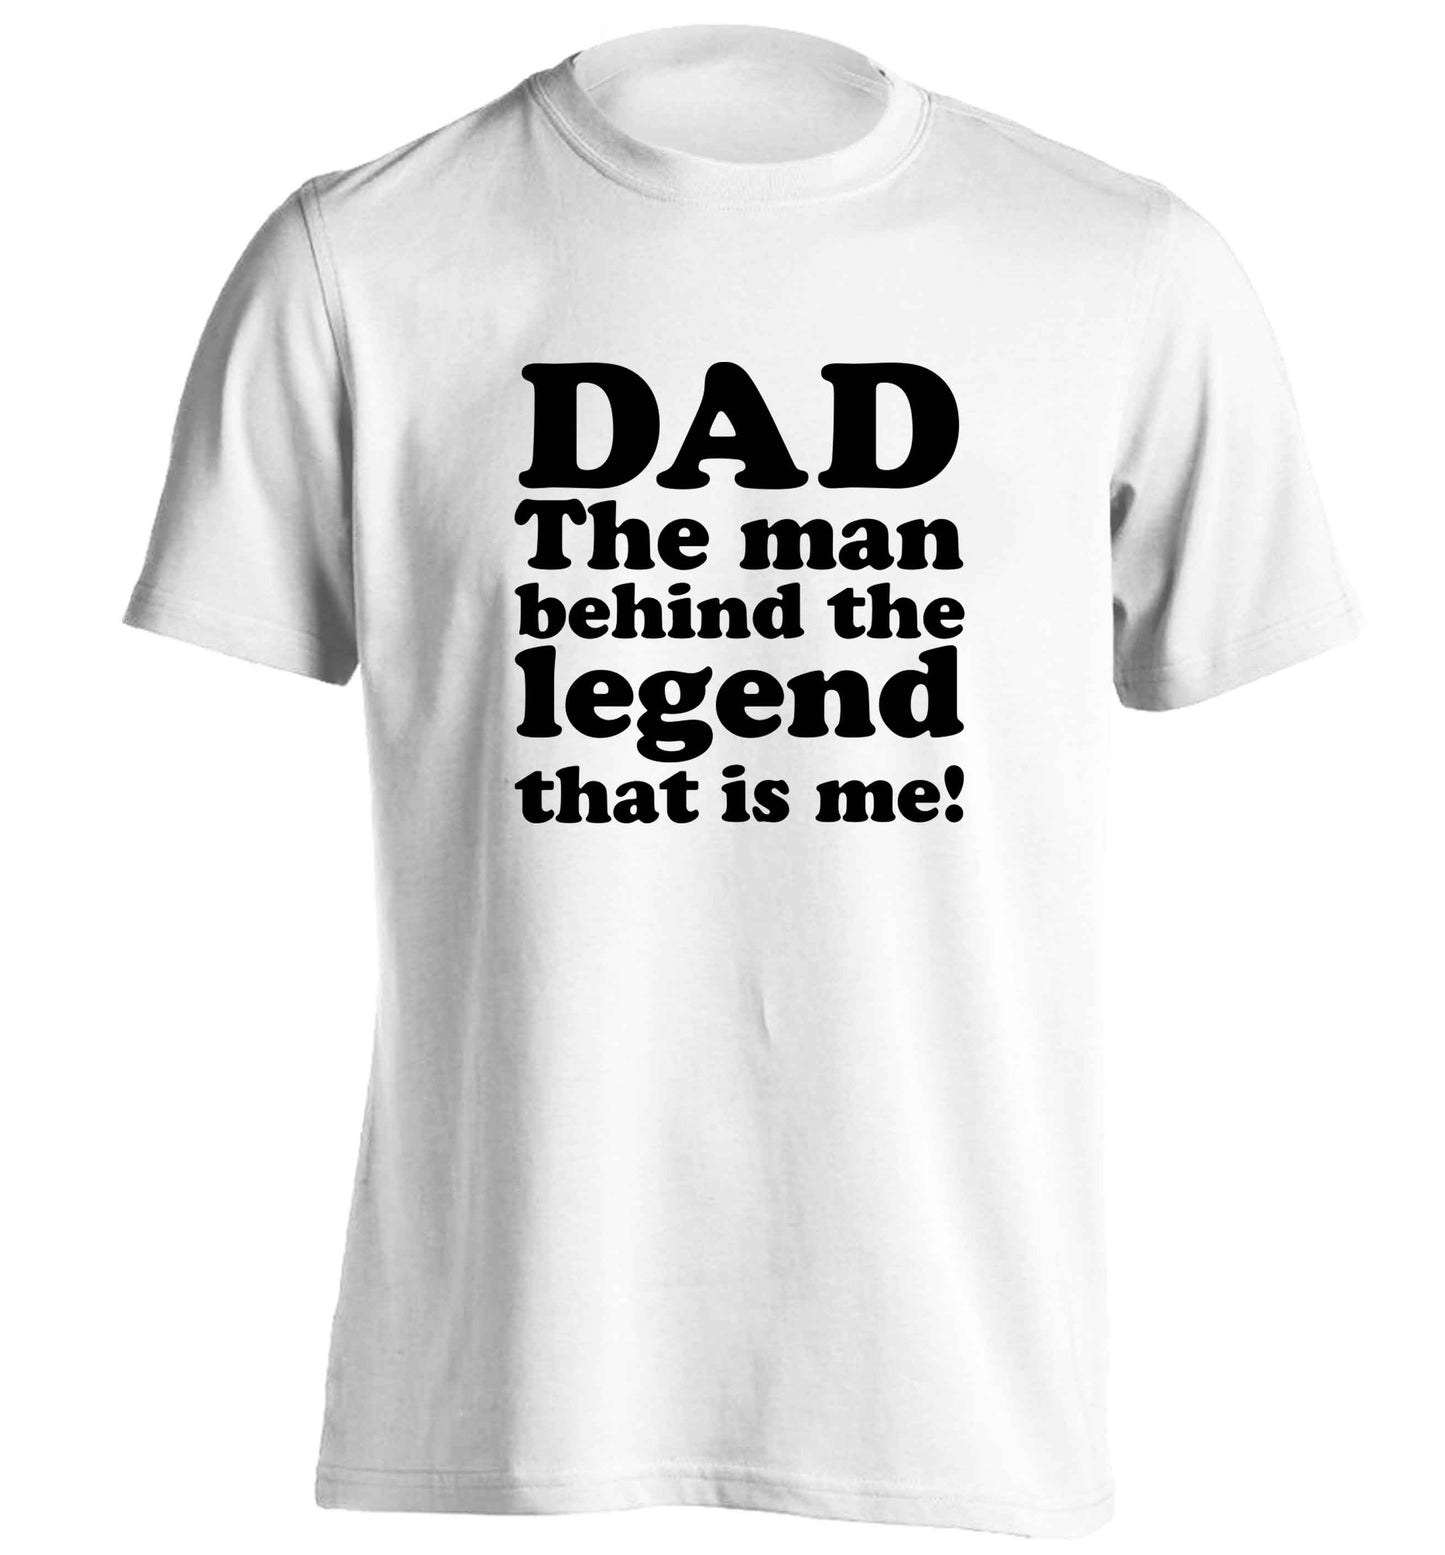 Dad the man behind the legend that is me adults unisex white Tshirt 2XL